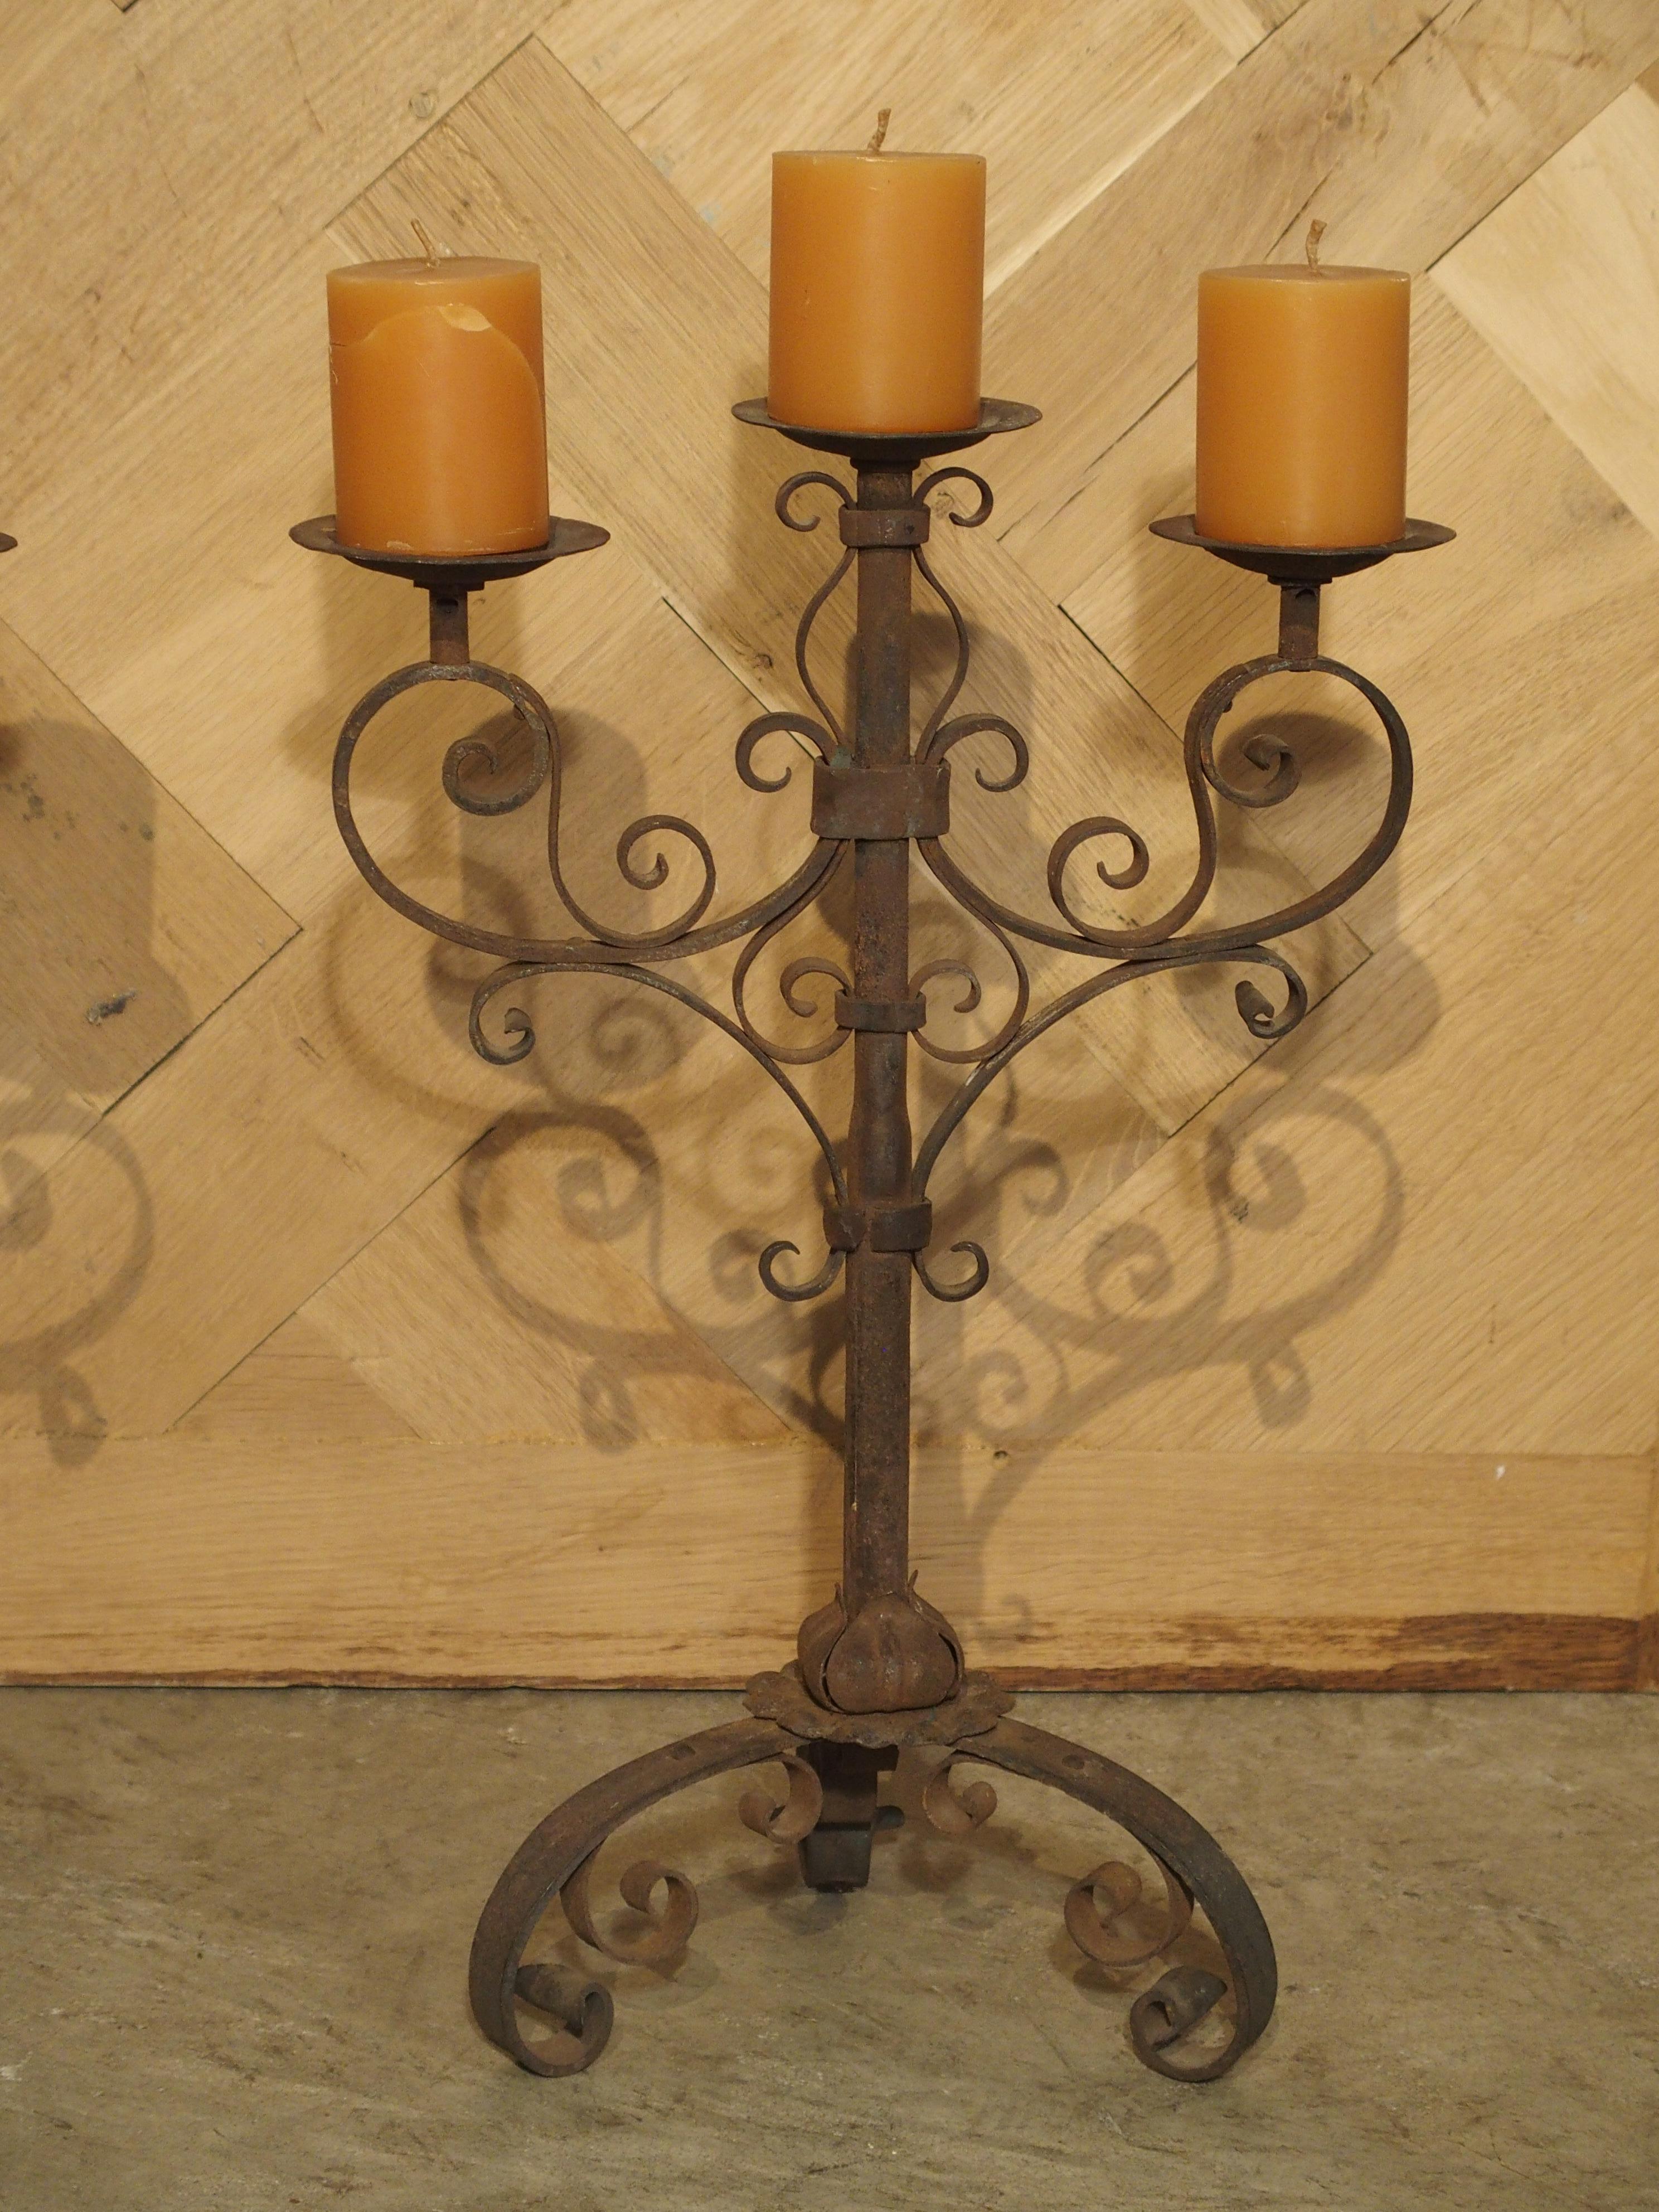 From Italy, this pair of wrought iron candelabras have three arms with the center arm being the highest. The candelabras are filled with C and S scrolls cascading out from a central iron stem. The bottom is made up of three inward scrolled feet. All